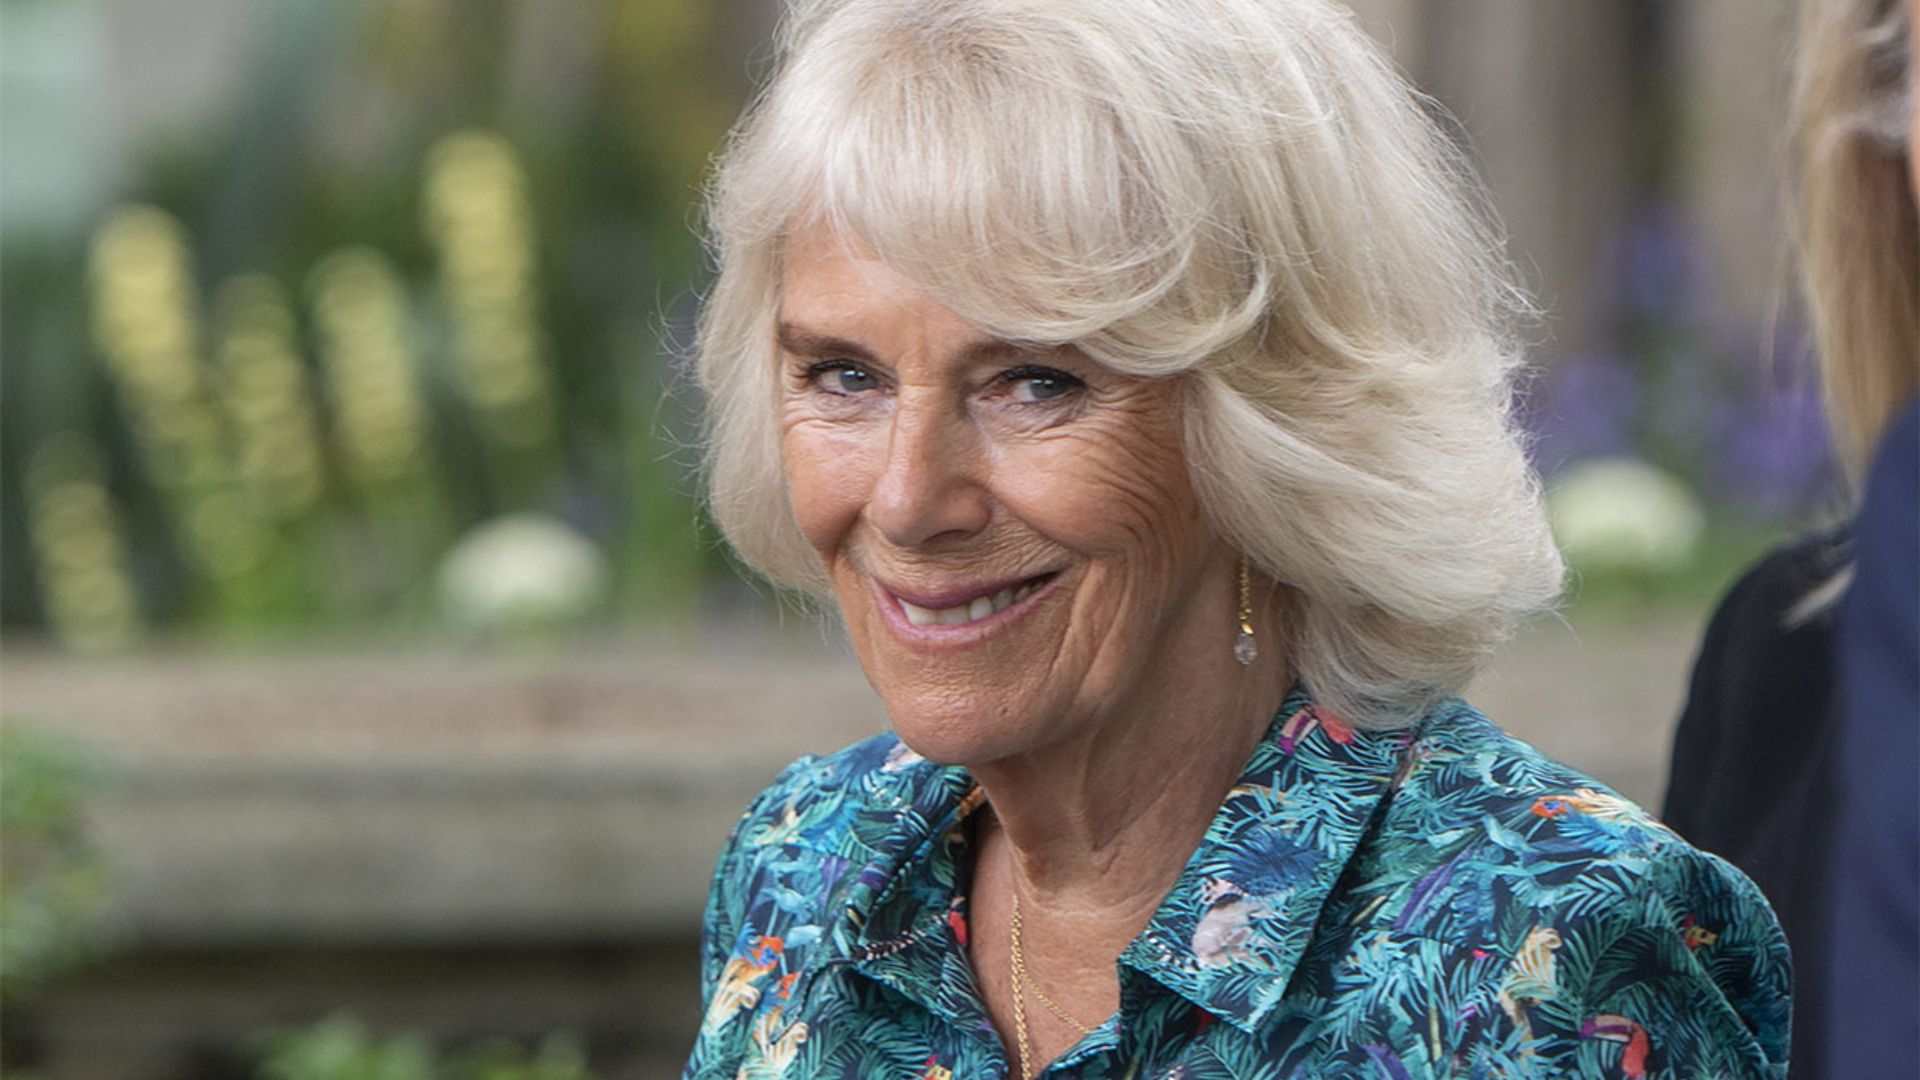 Duchess Camilla steps out in an eye-catching statement dress